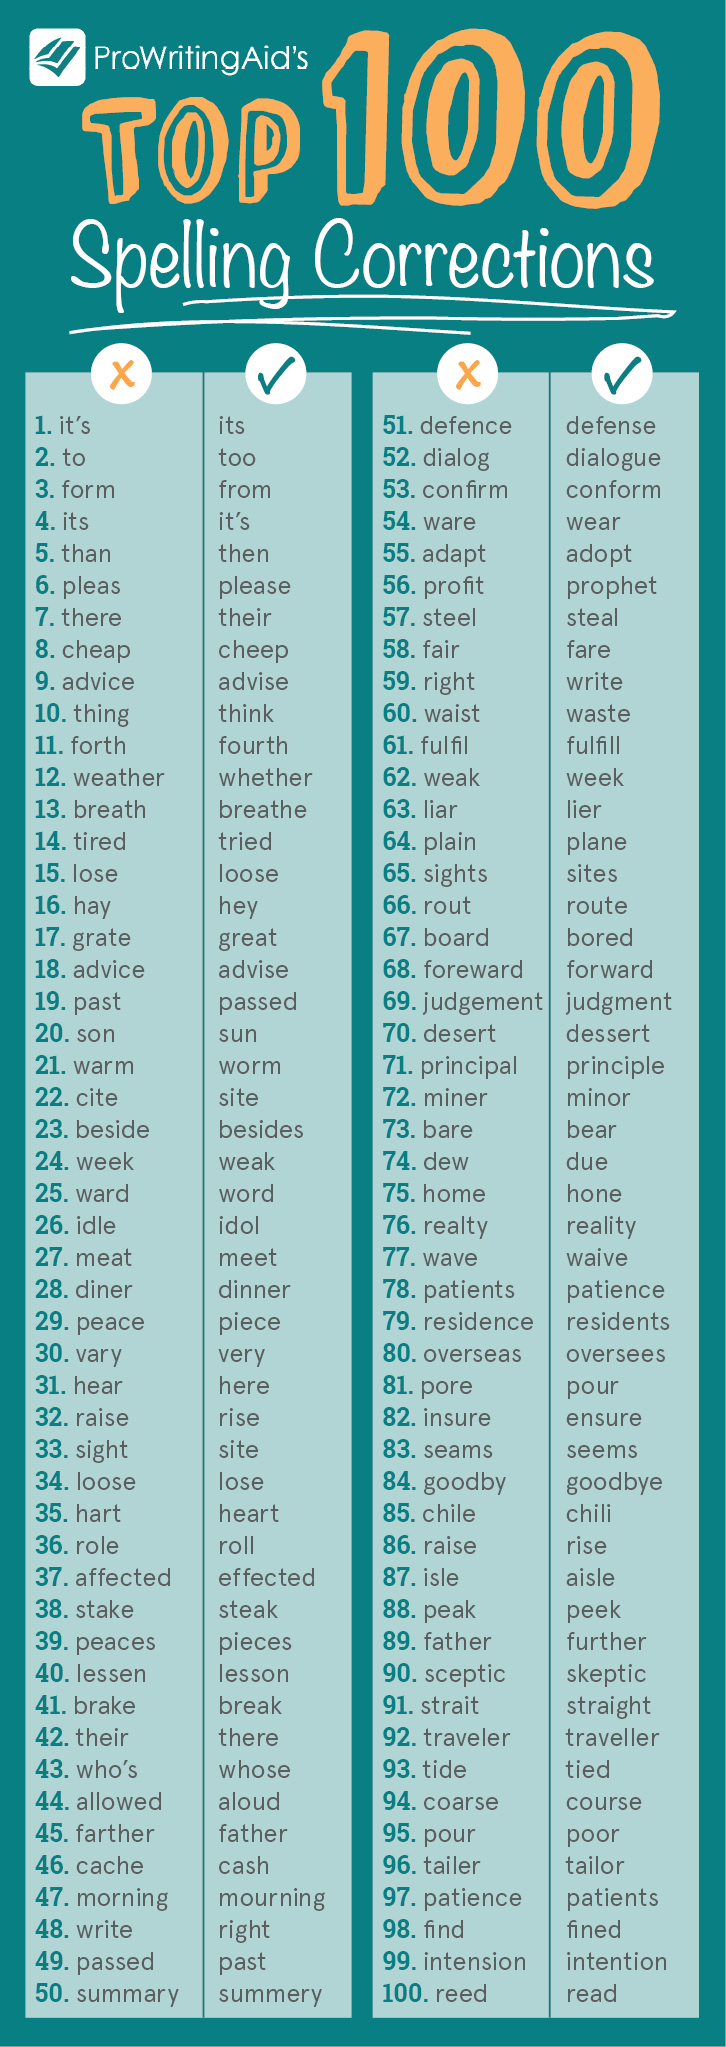 the-100-most-common-spelling-corrections-found-by-prowritingaid